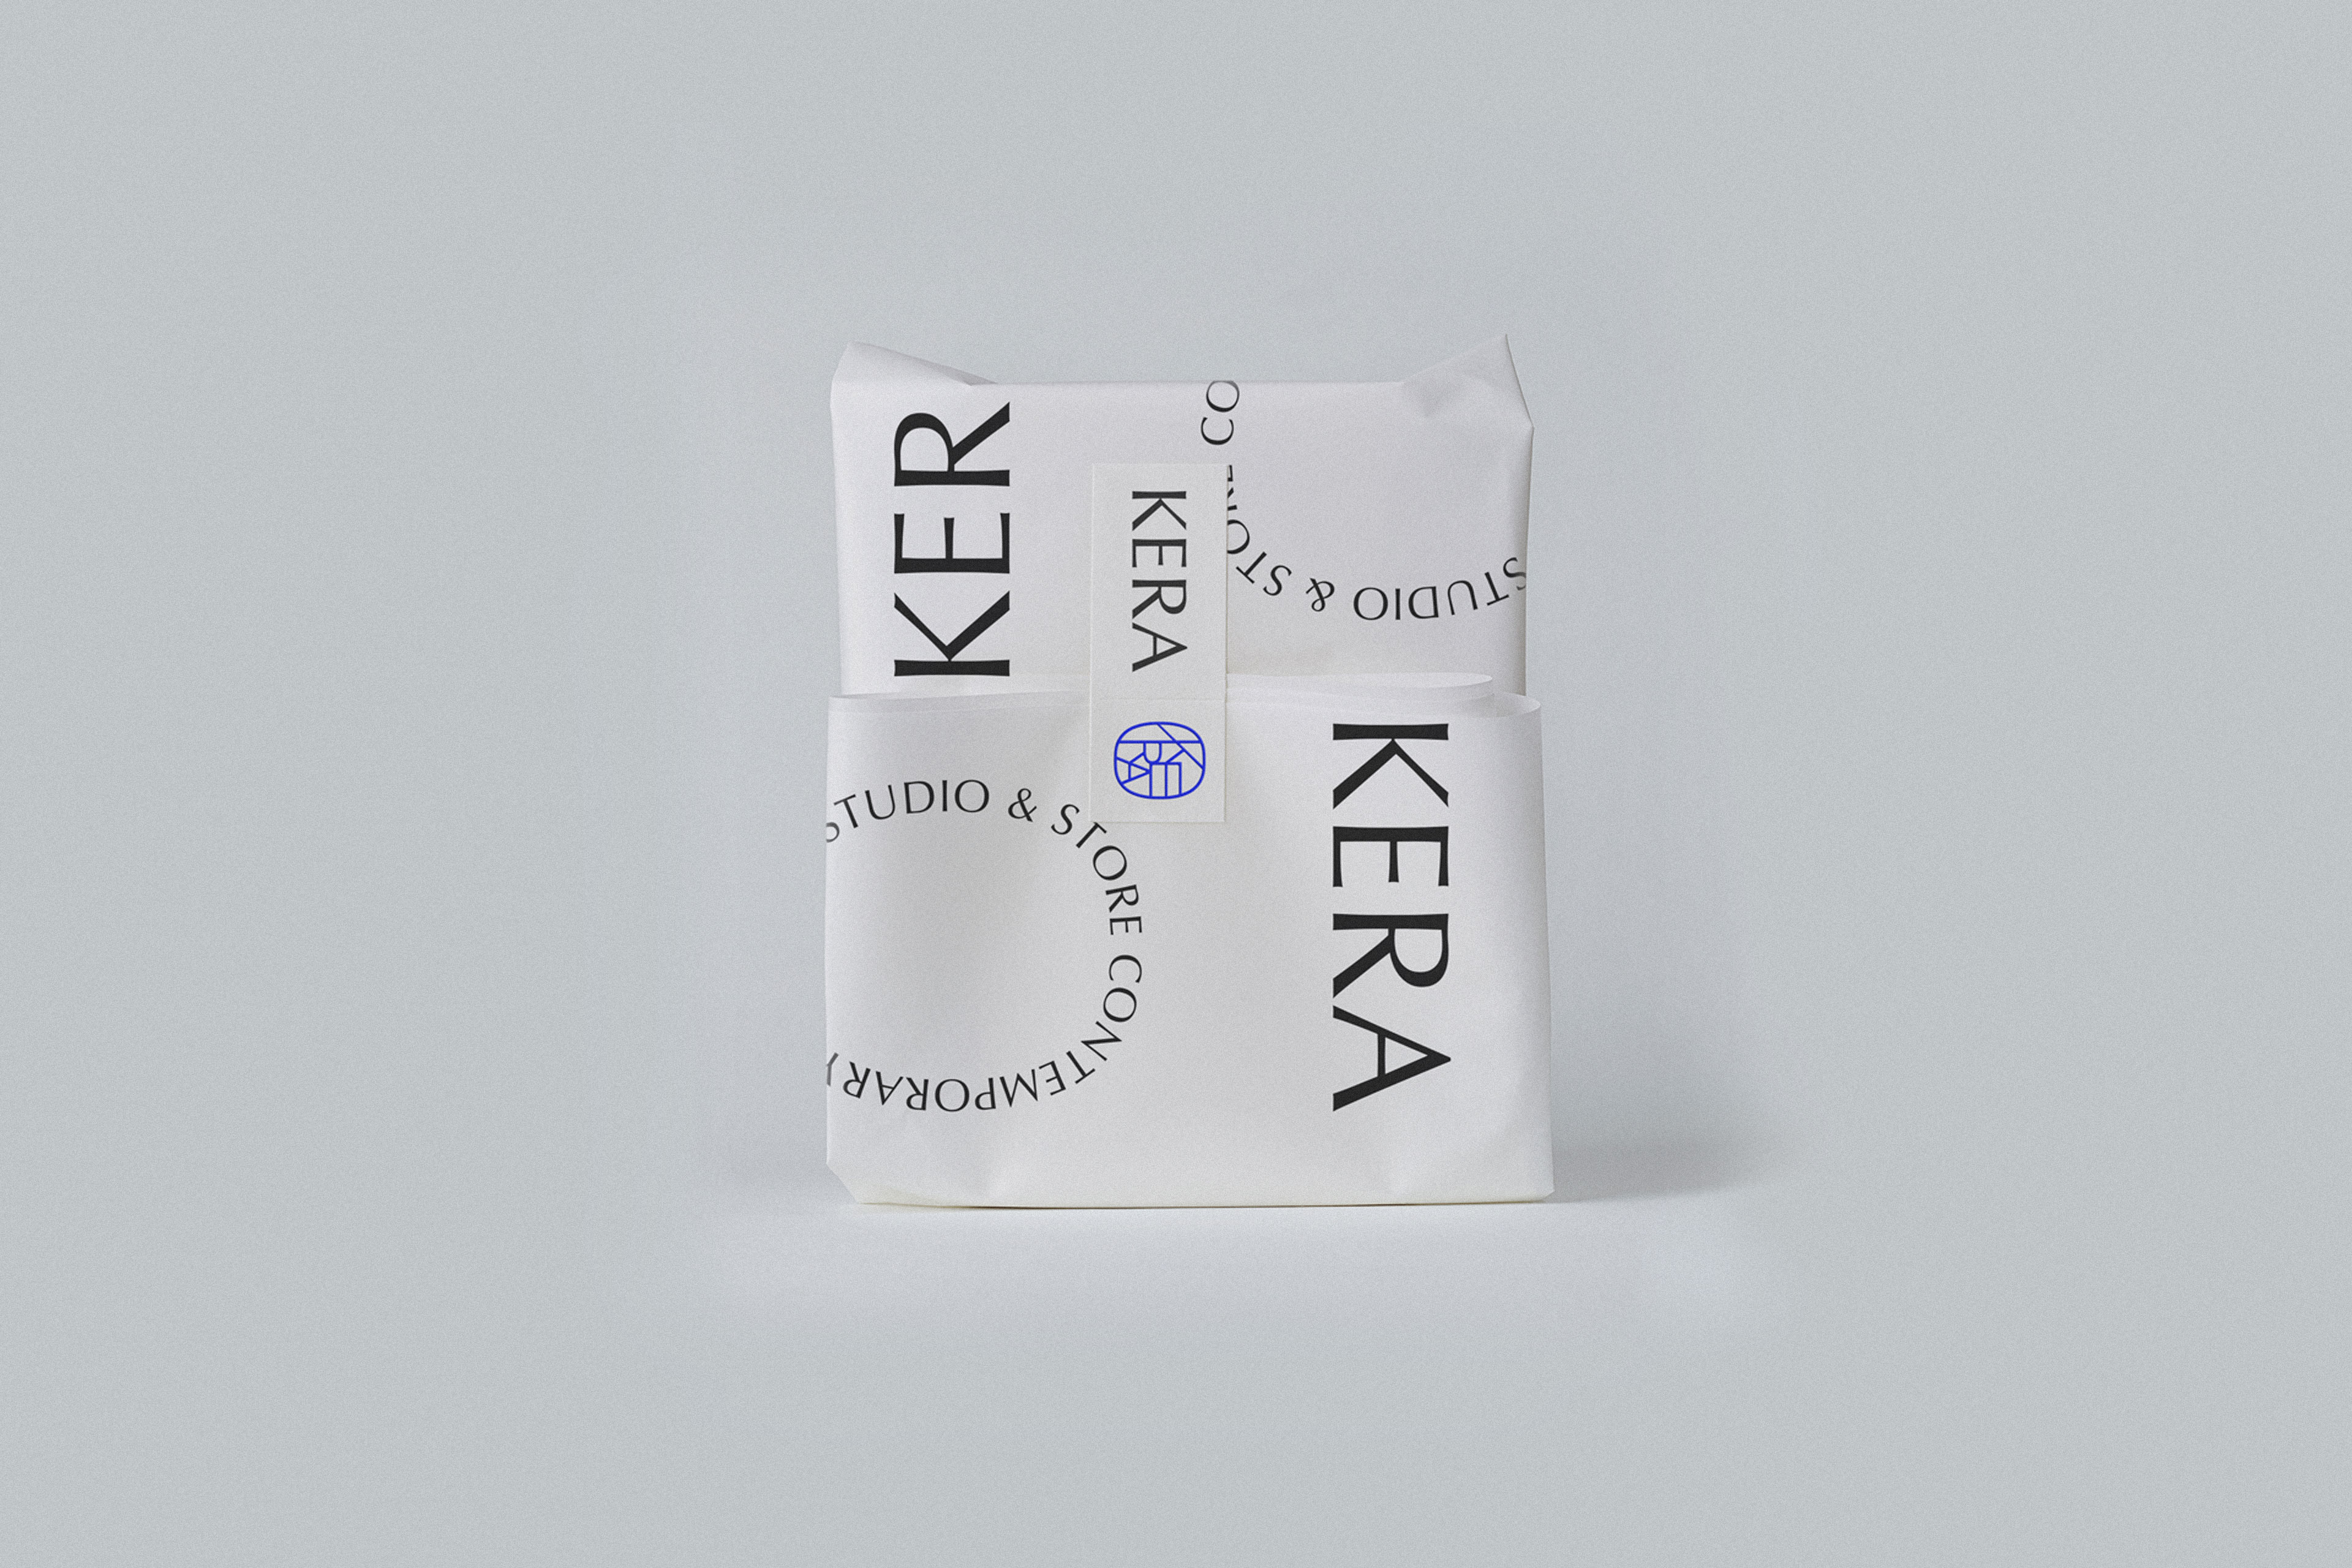 Two packets of kera on a white background.